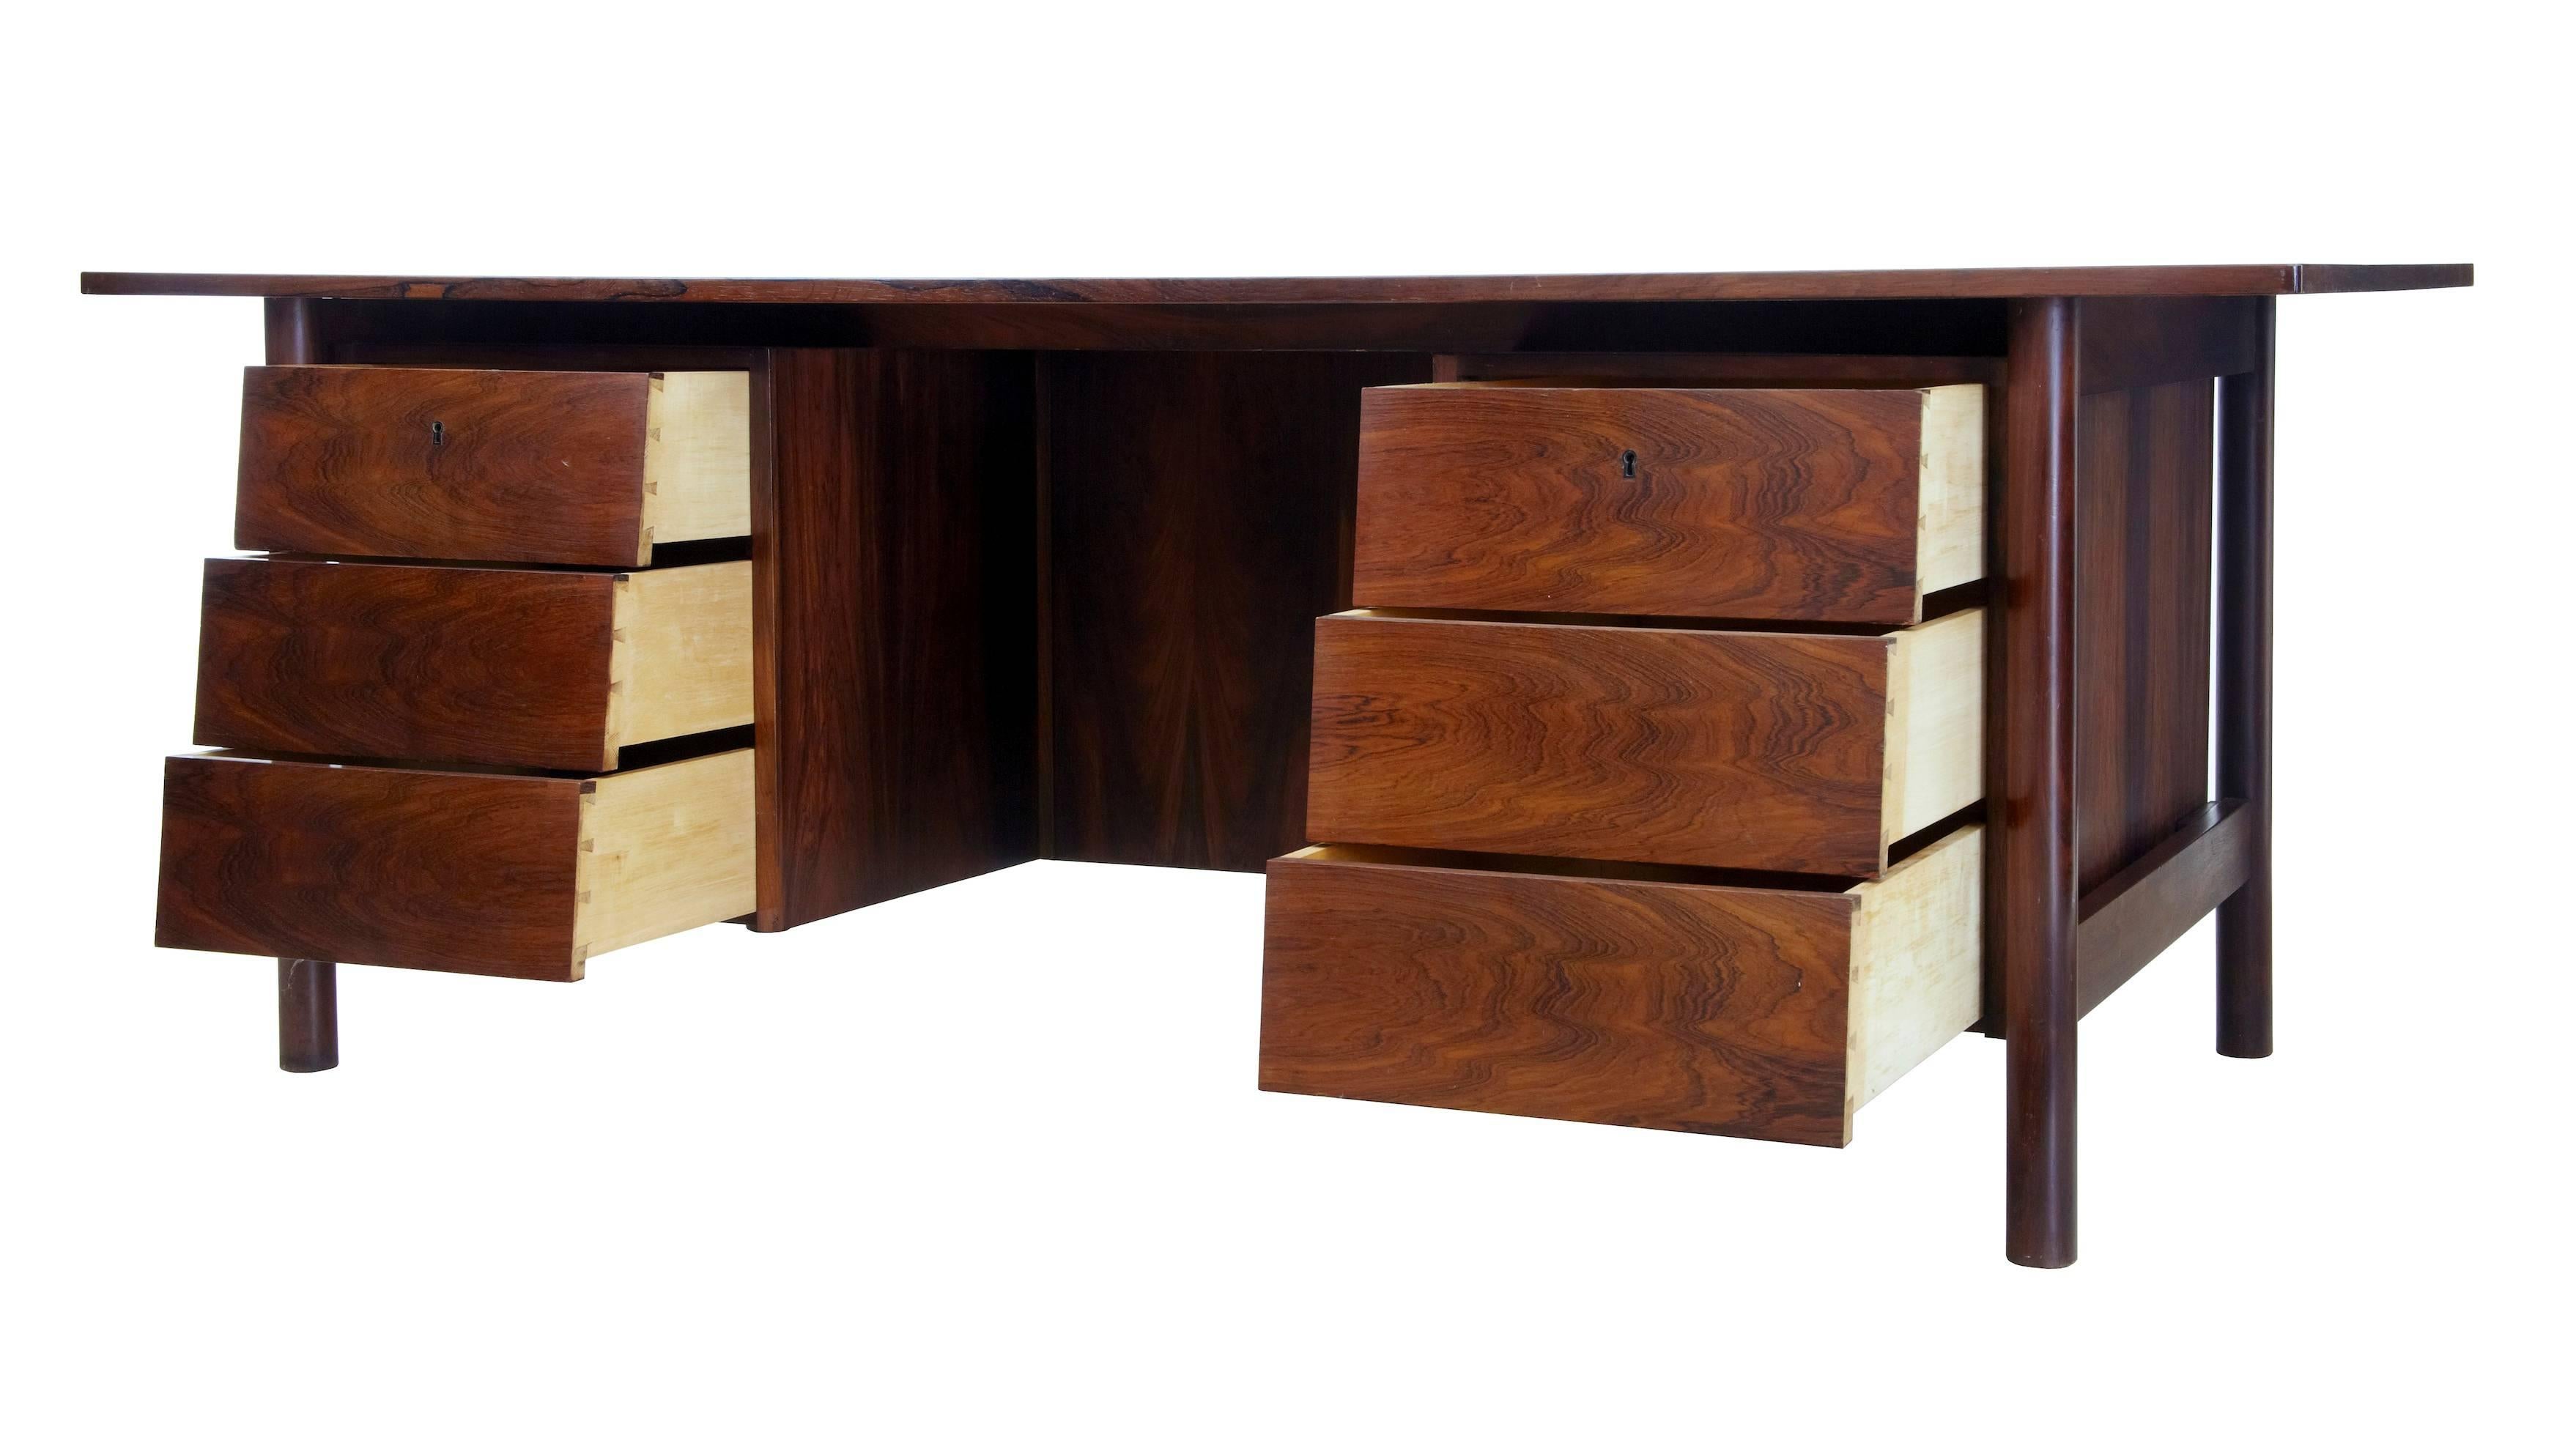 Excellent quality freestanding jacaranda rosewood desk, circa 1960.
Oversailing striking rosewood top.
Two banks of stepped drawers either side of the knee hole, on the reverse is a single shelf bookcase.
There is further storage space above the